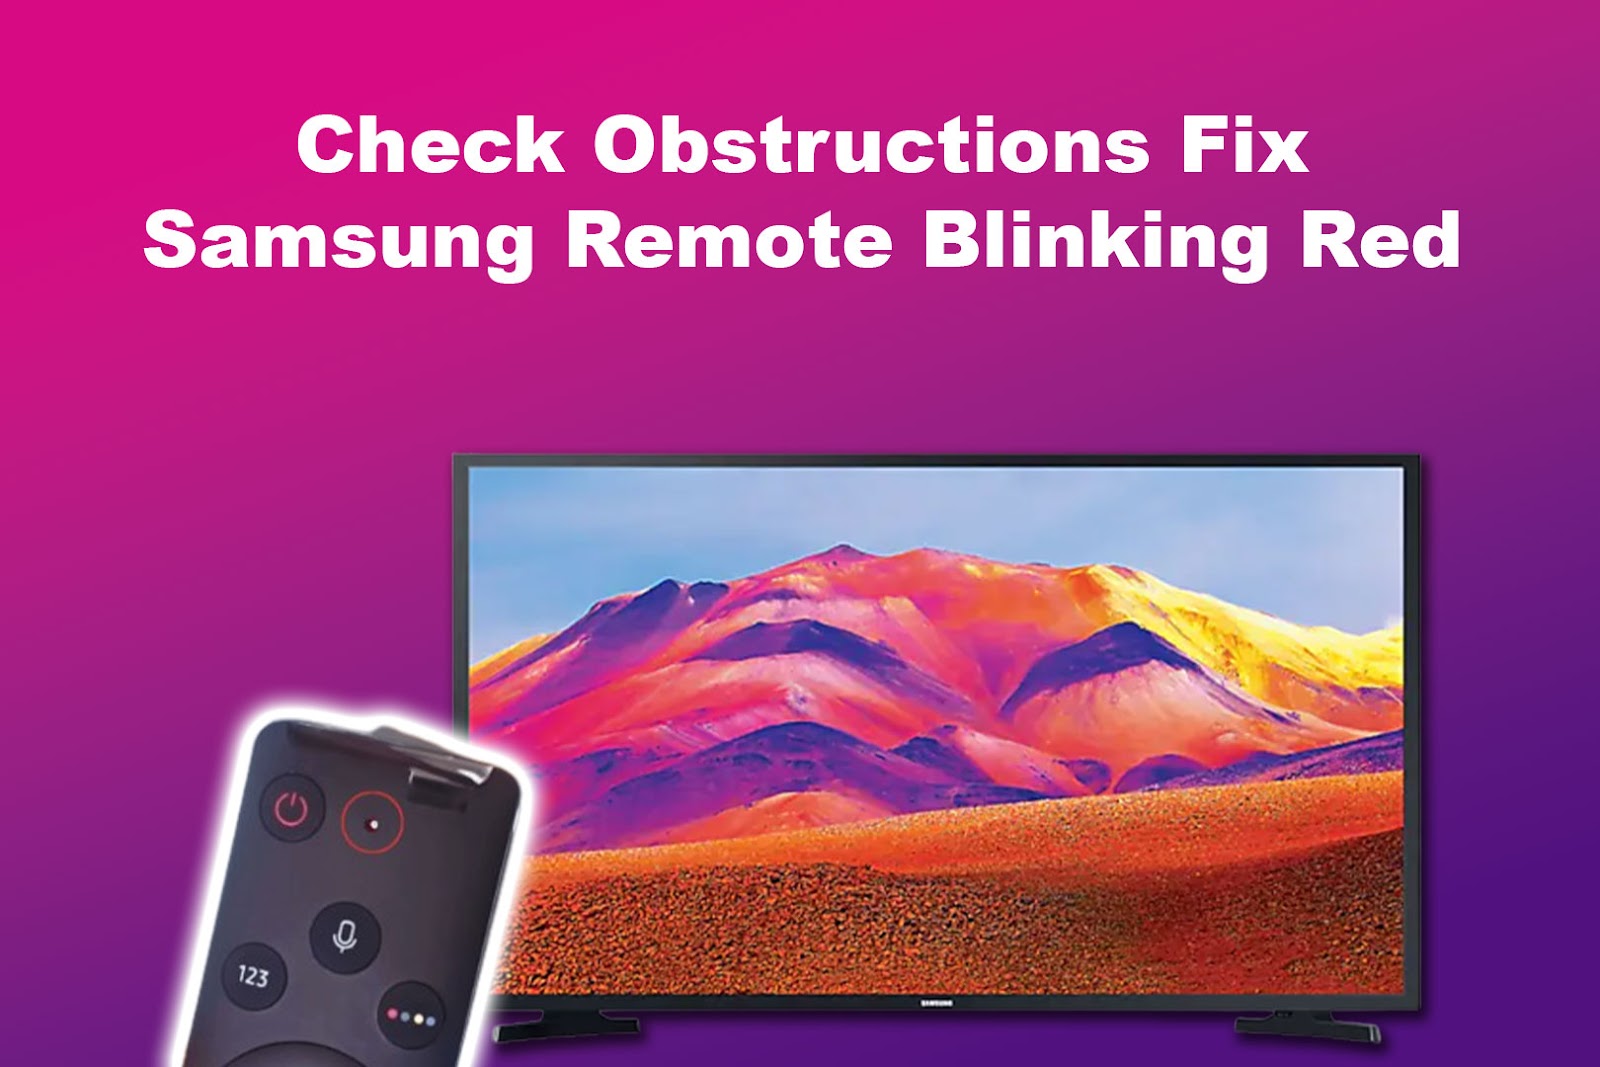 Check Obstructions Fix Samsung Remote Blinking Red